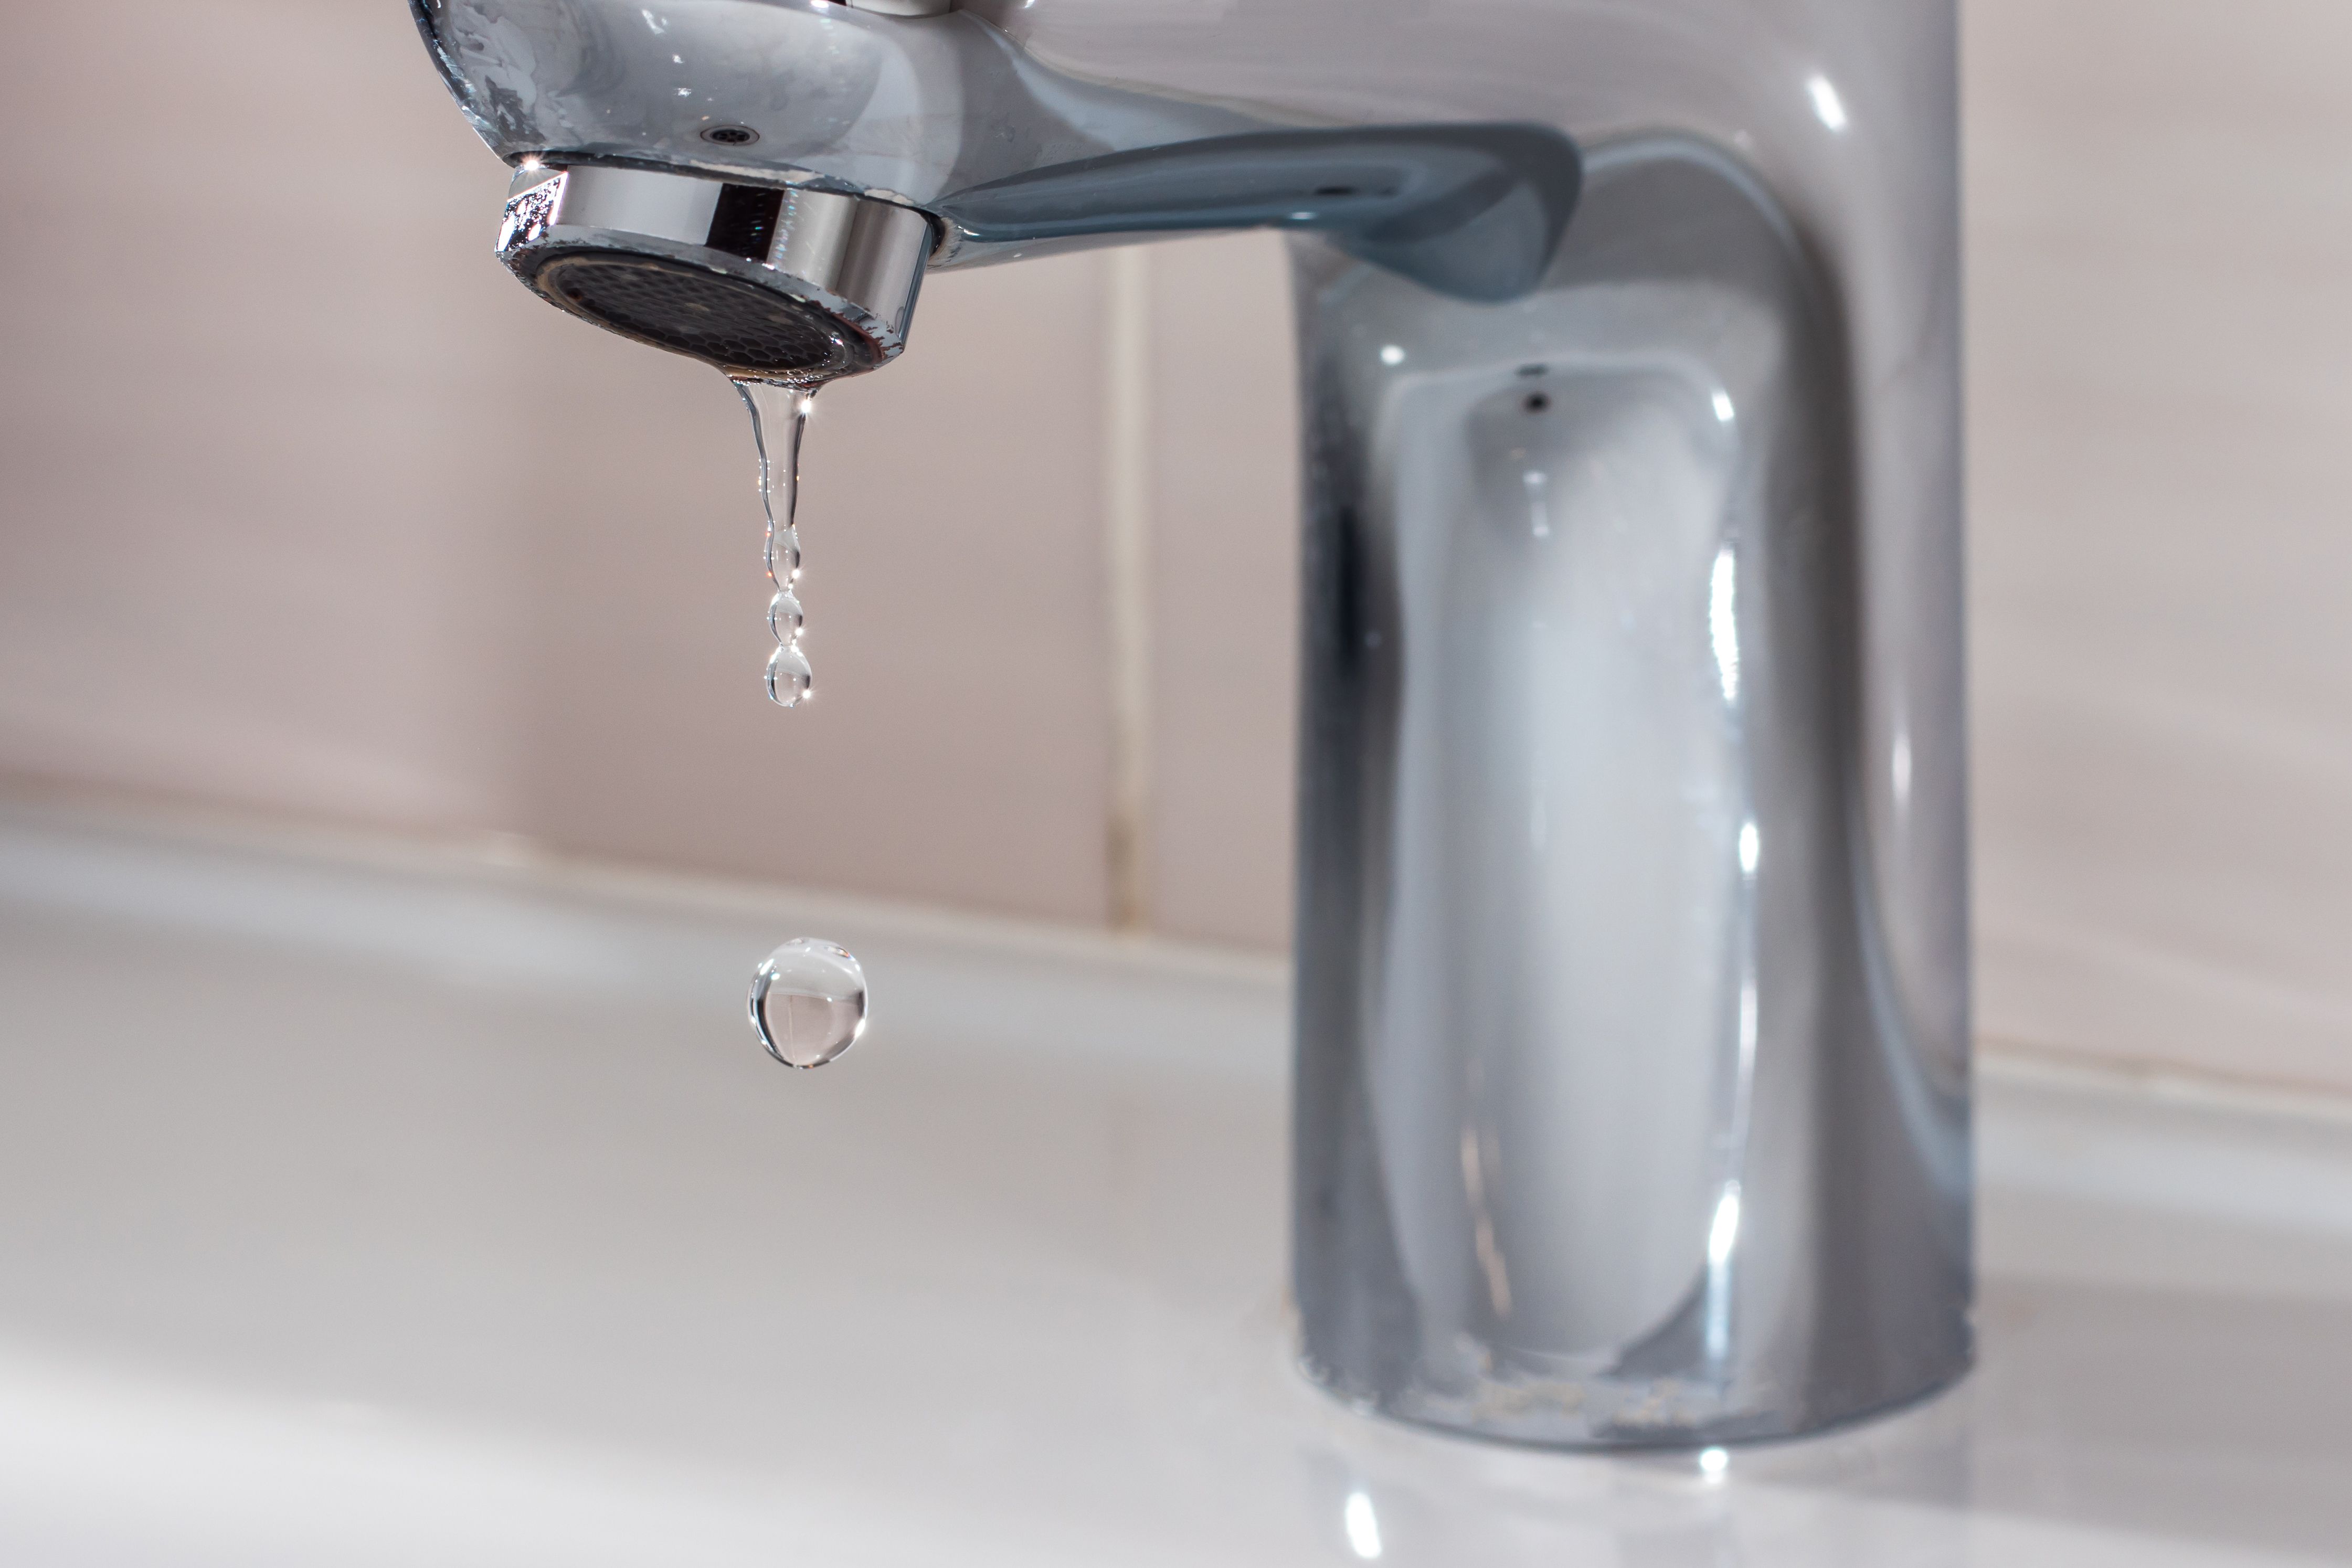 How to Fix a Leaky Faucet - 24 Easy Steps to Fix a Faucet